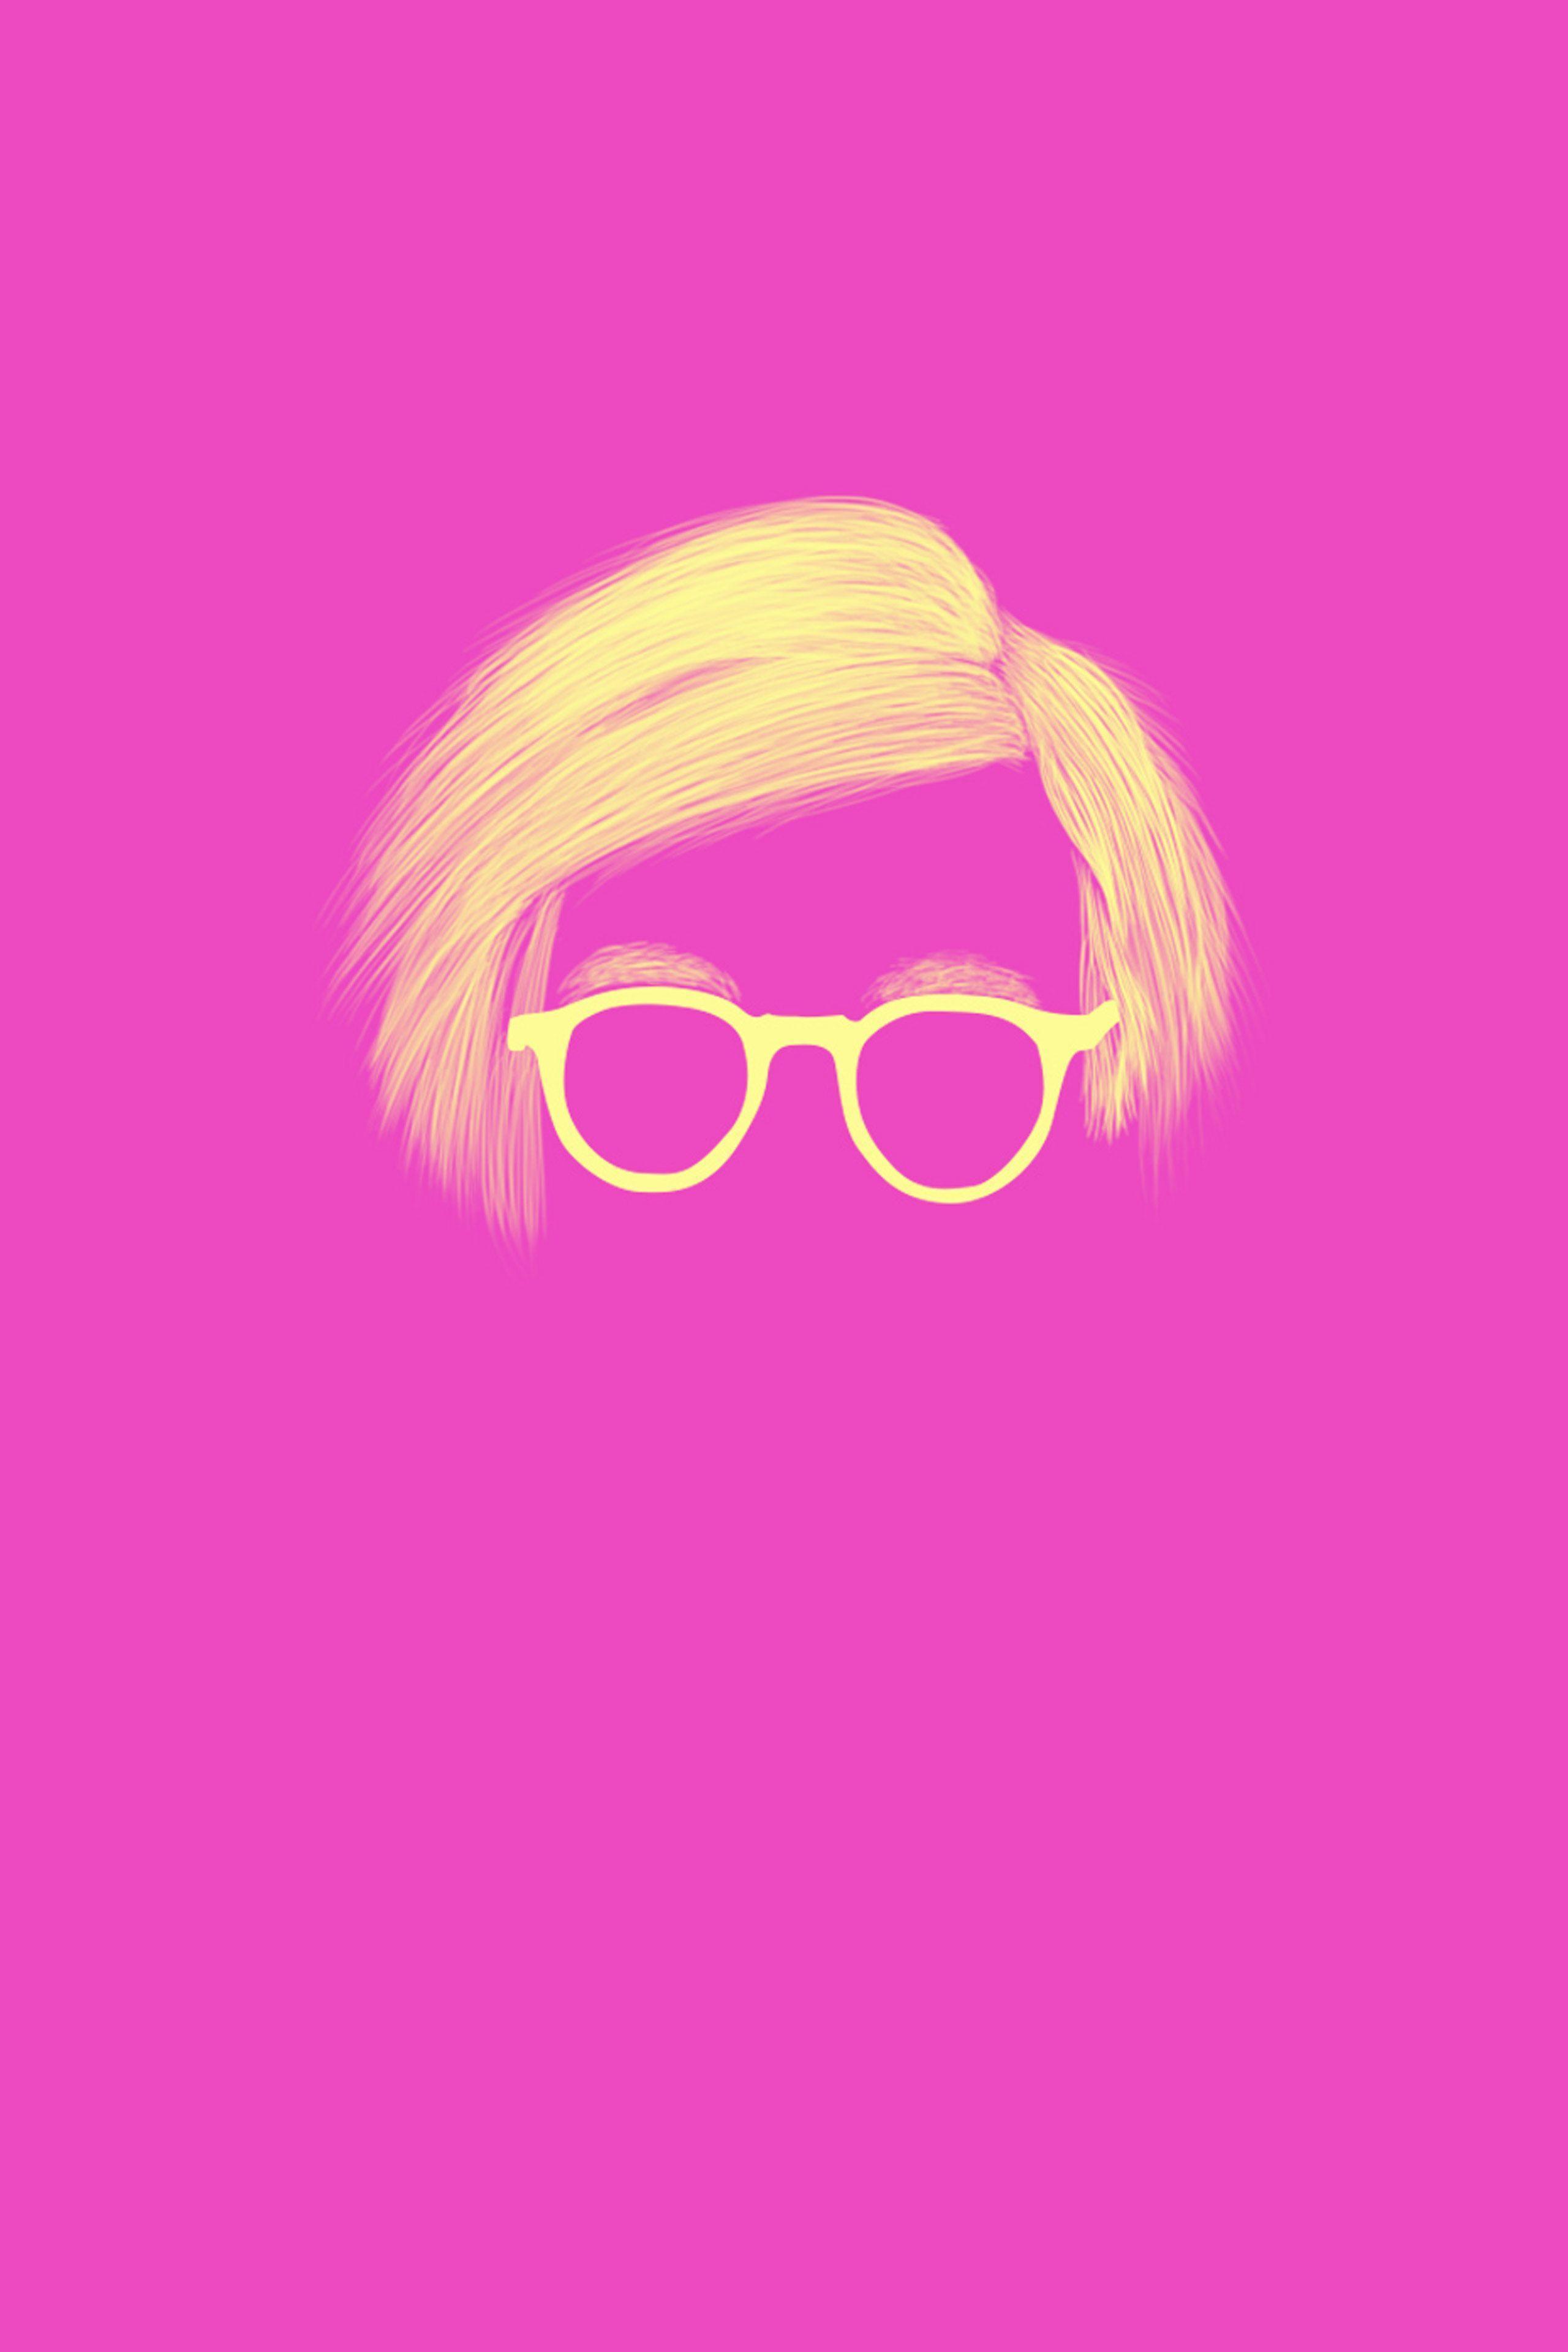 Andy Warhol Wallpaper, Adorable HDQ Background of Andy Warhol